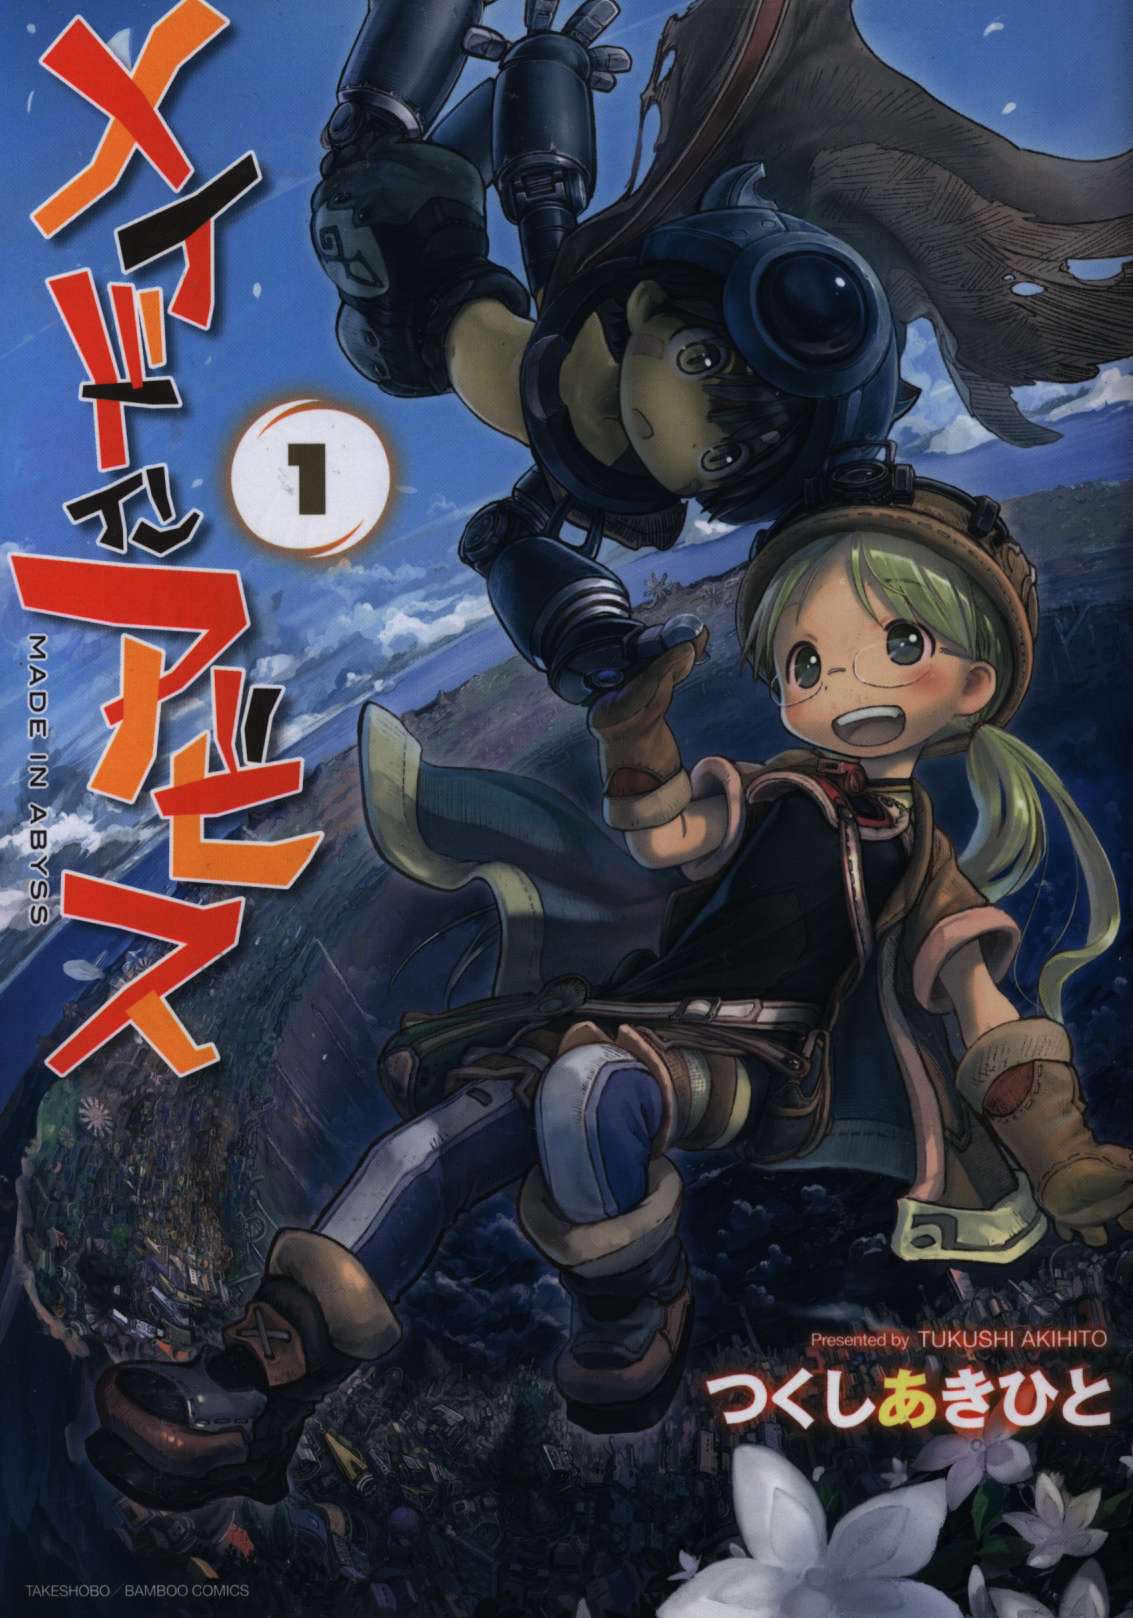 MADE IN ABYSS Vol.1-12 Comics Set Japanese Ver Manga